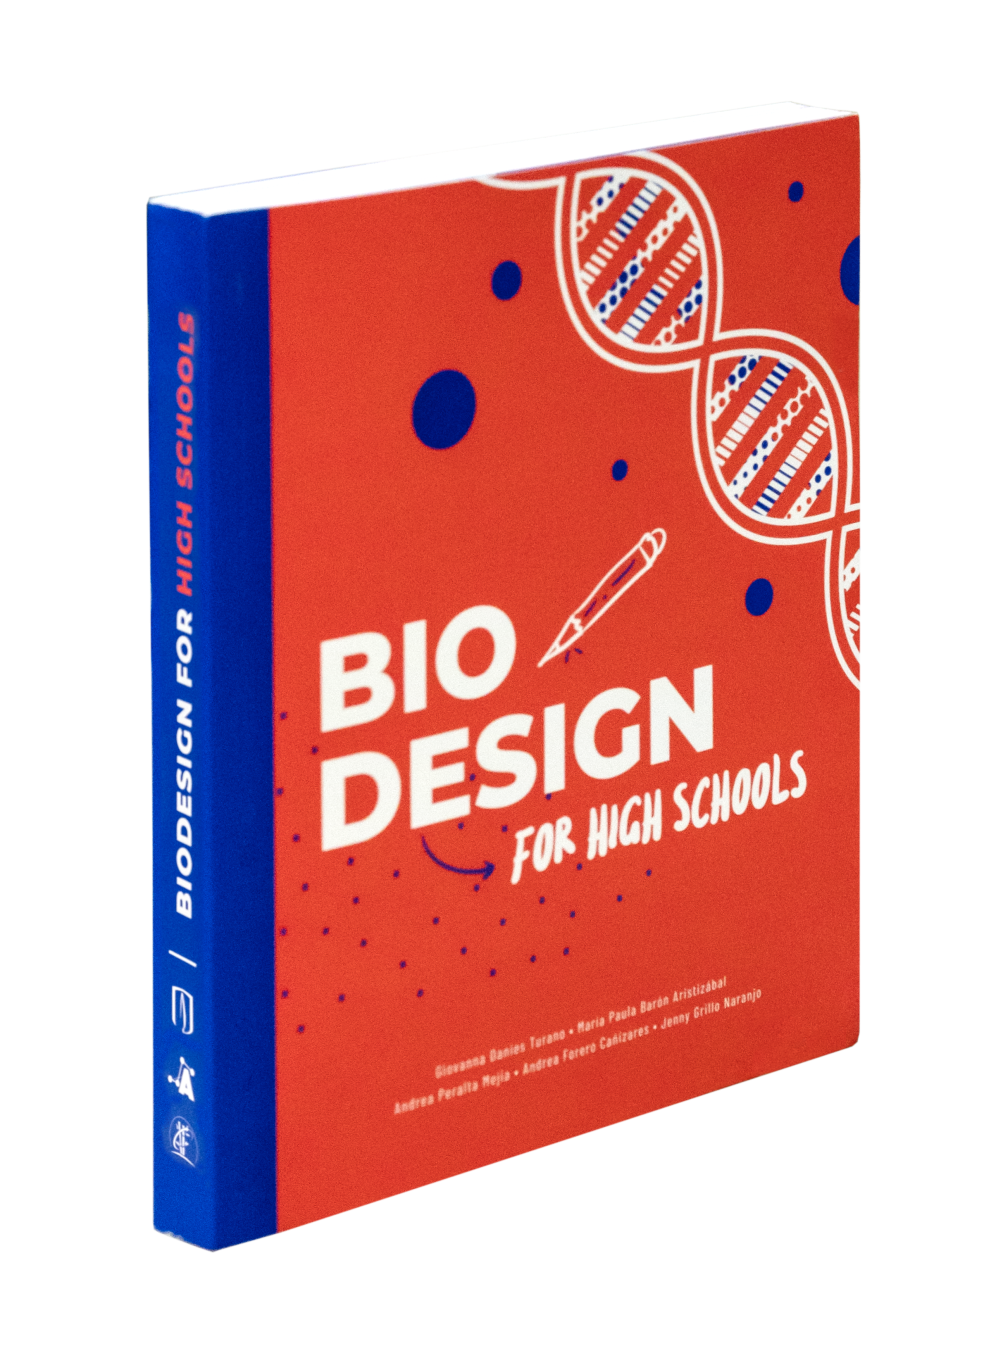 Biodesign for high schools